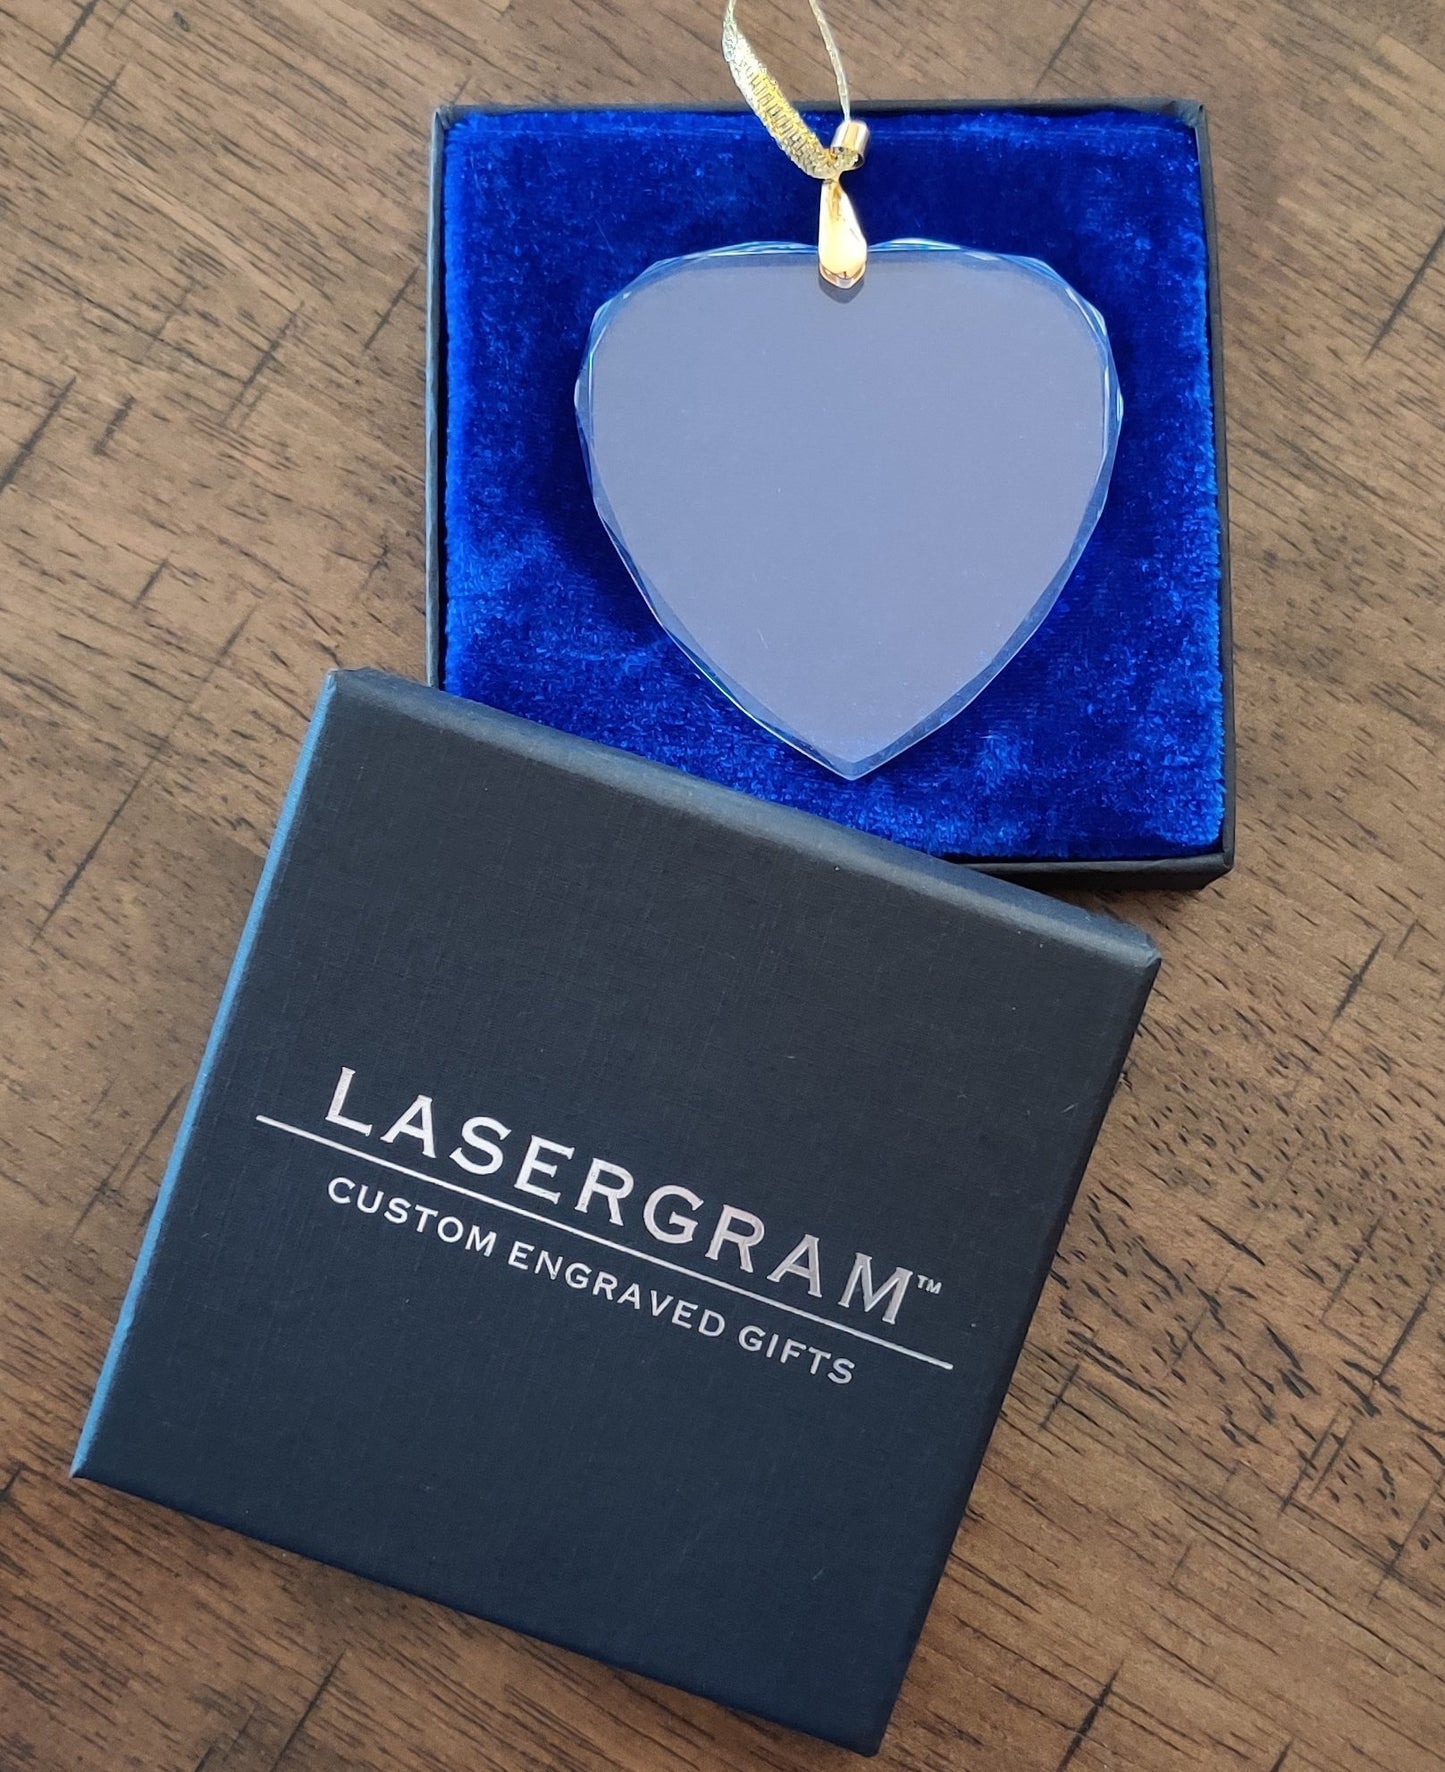 LaserGram Christmas Ornament, Grand Piano, Personalized Engraving Included (Heart Shape)